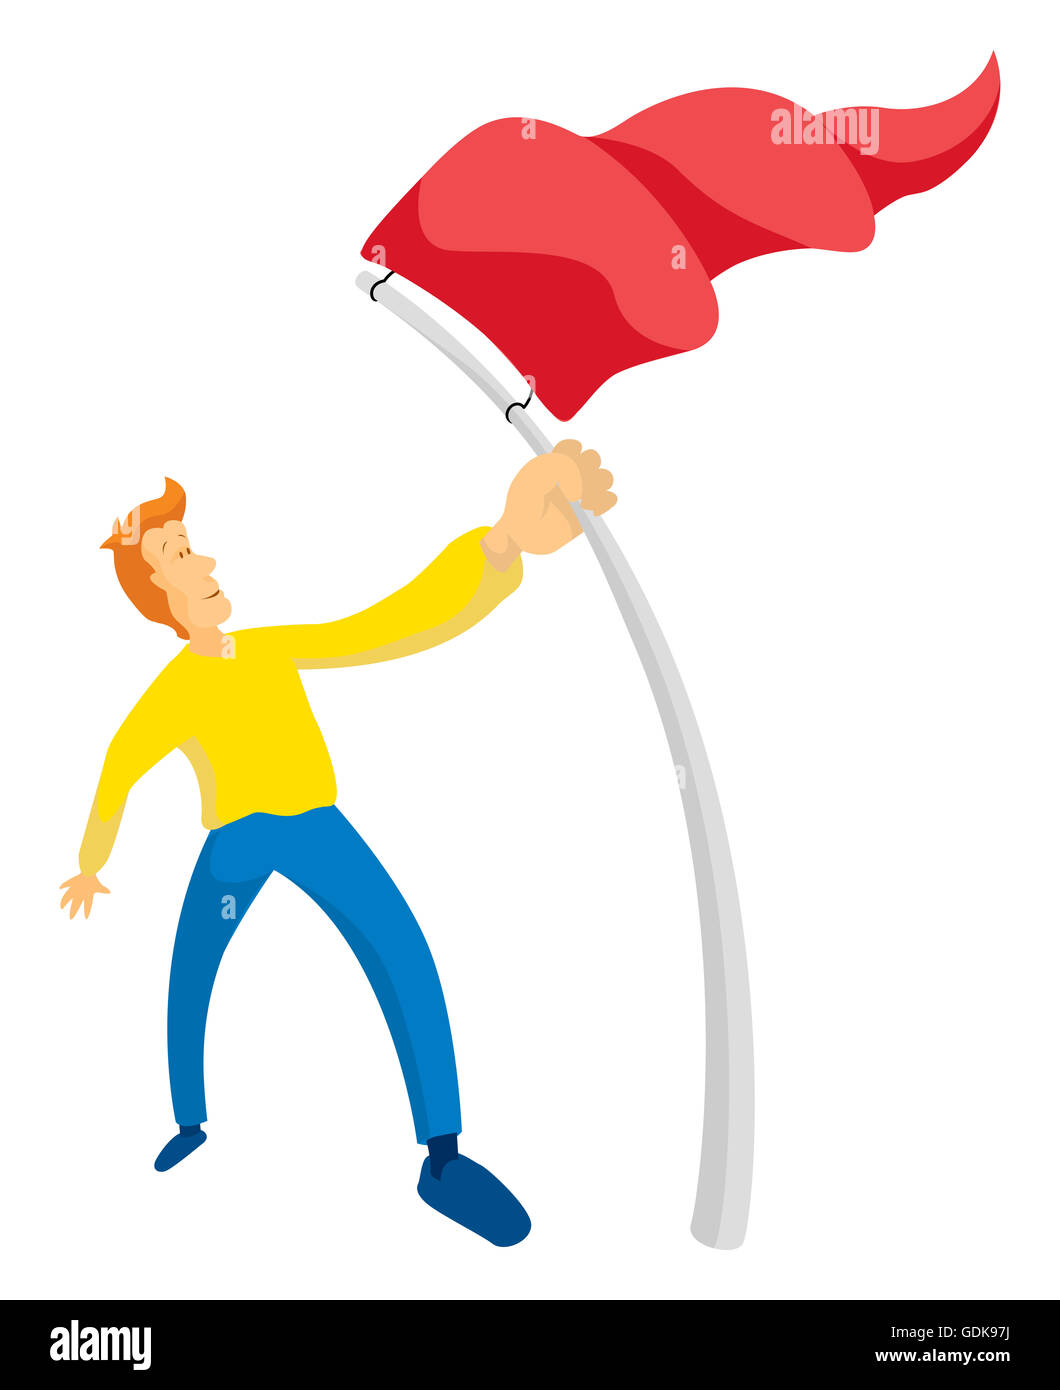 Cartoon illustration of man holding a red flag conquering objectives Stock Photo